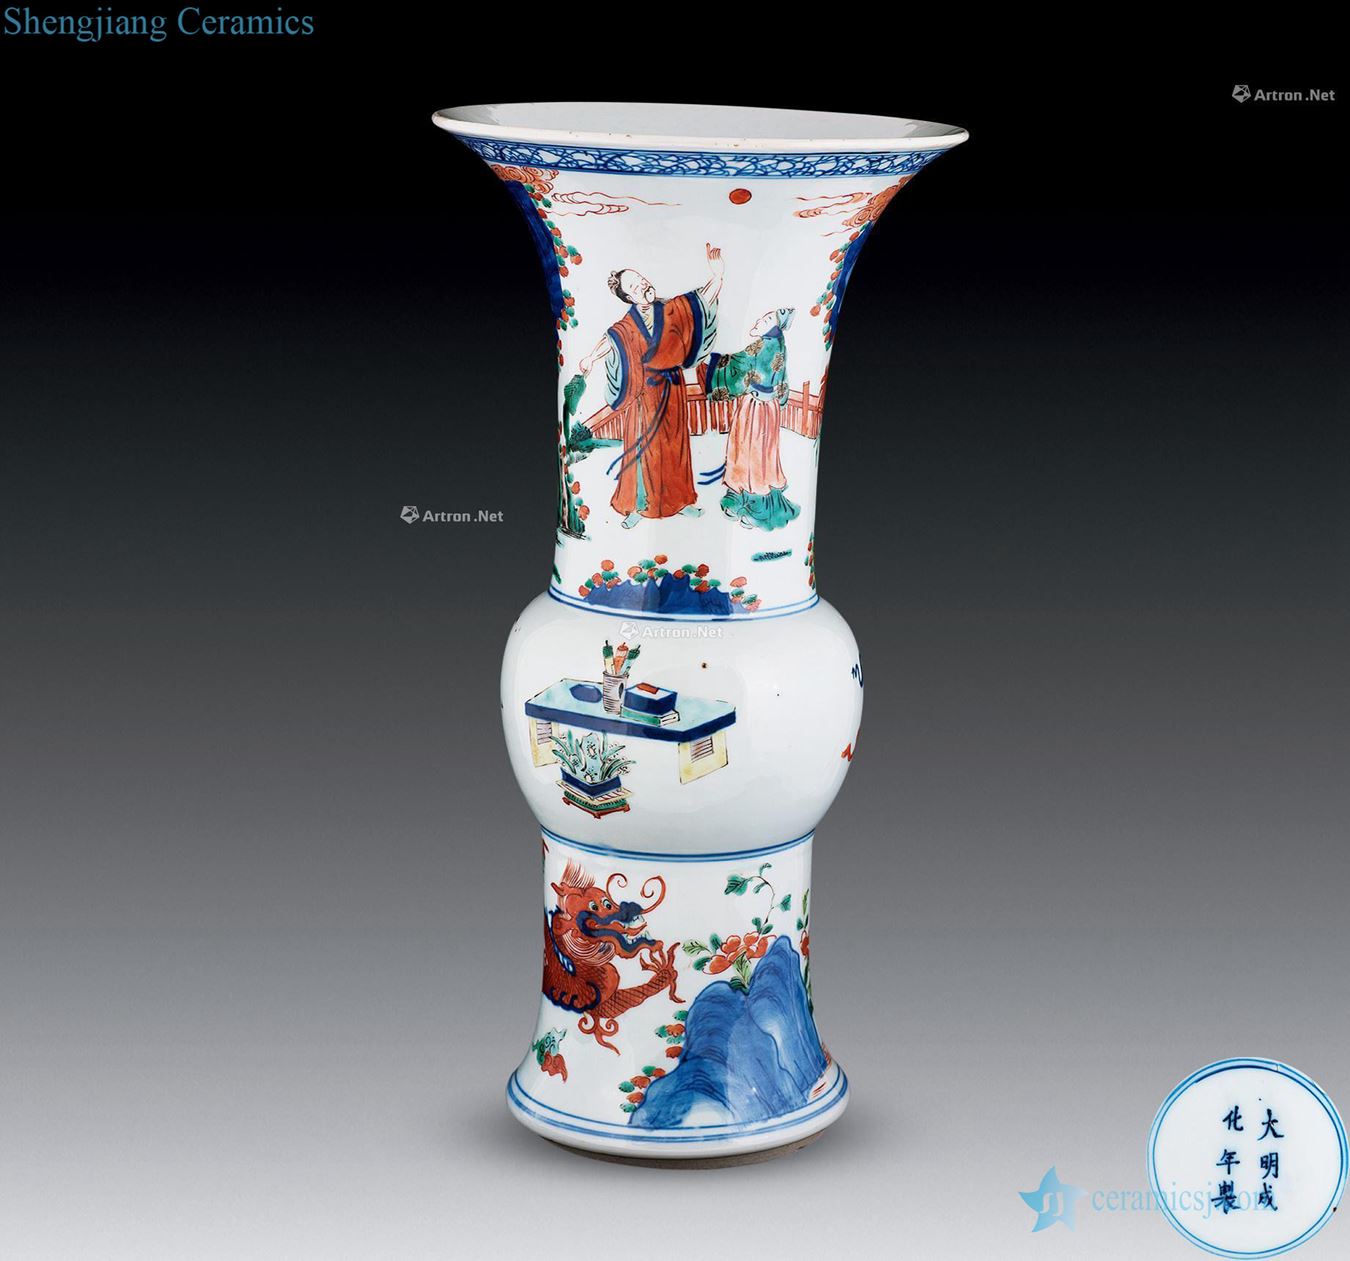 Qing guangxu Blue and white stripes flower vase with colorful fairy characters